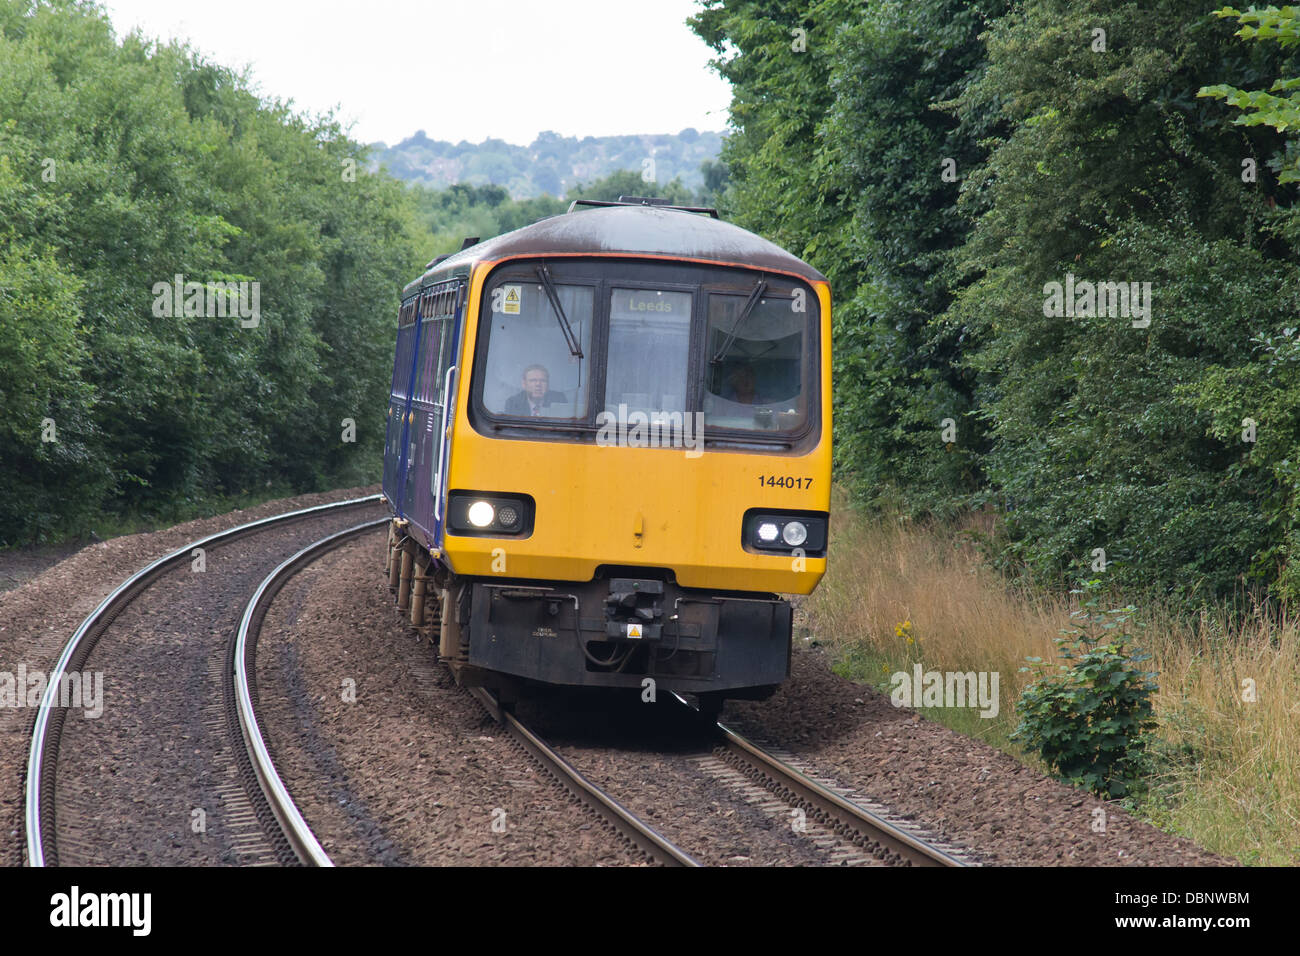 A diesel passenger train on the mainline approaching Deighton station near Huddersfield, West Yorkshire, England Stock Photo